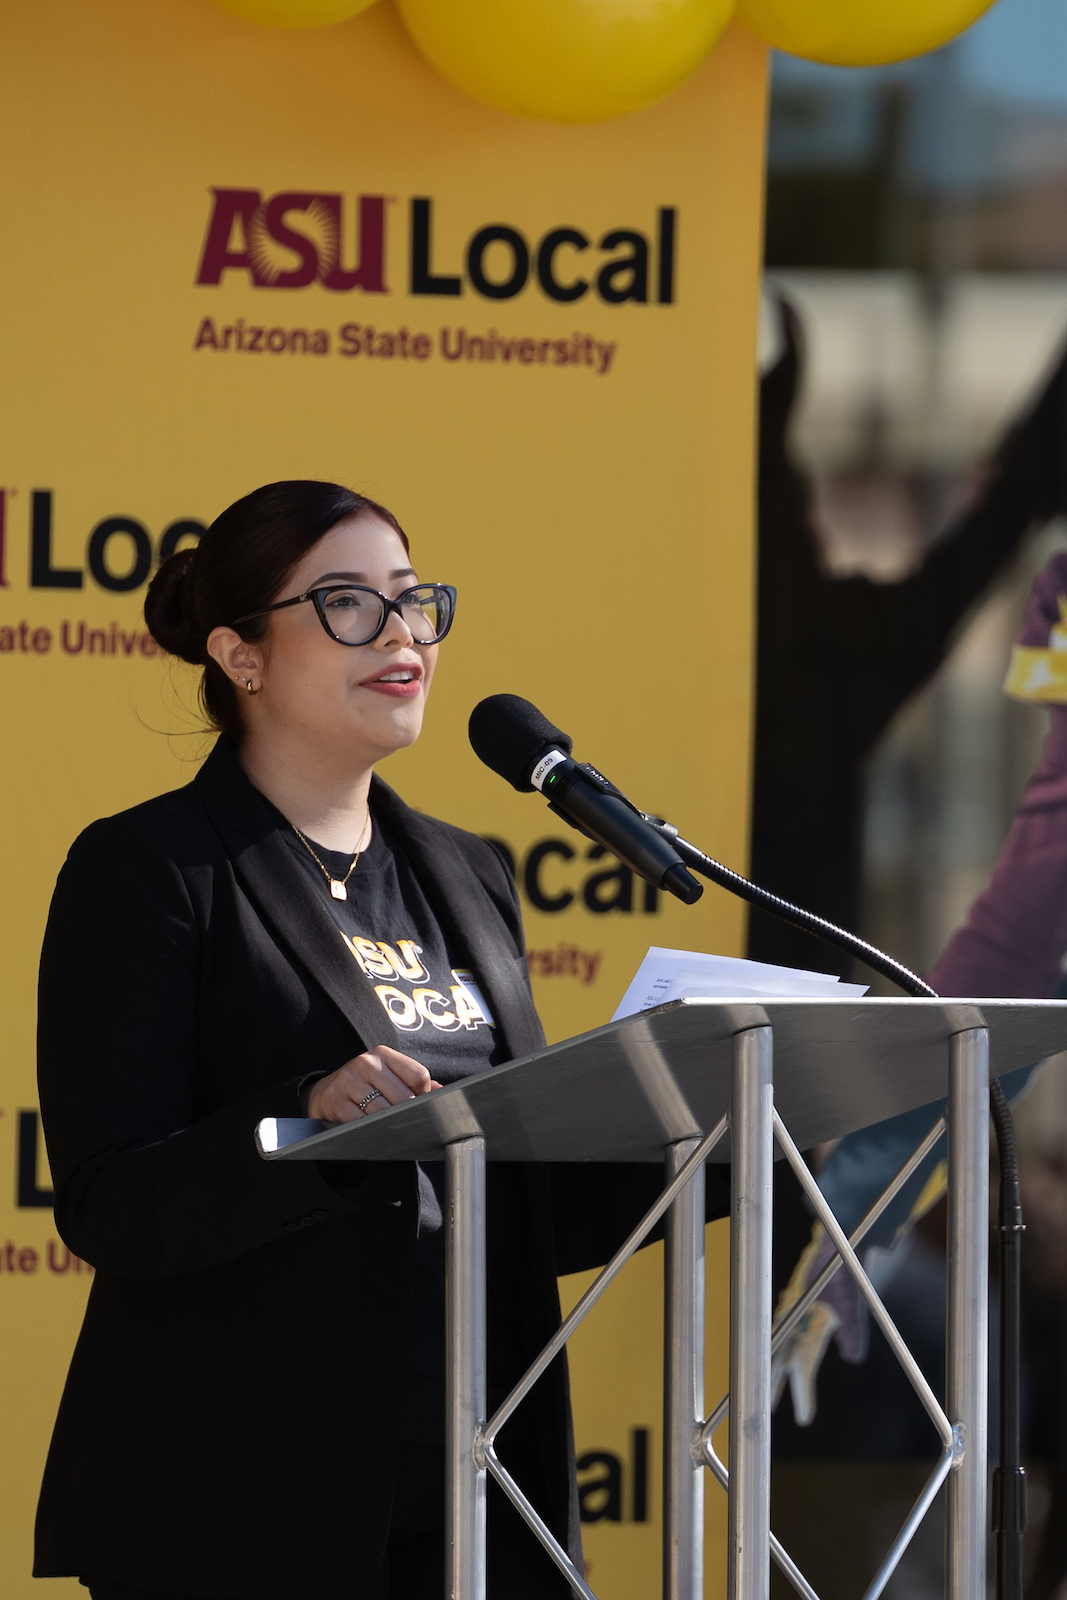 student speaking at lectern at ASU Local event